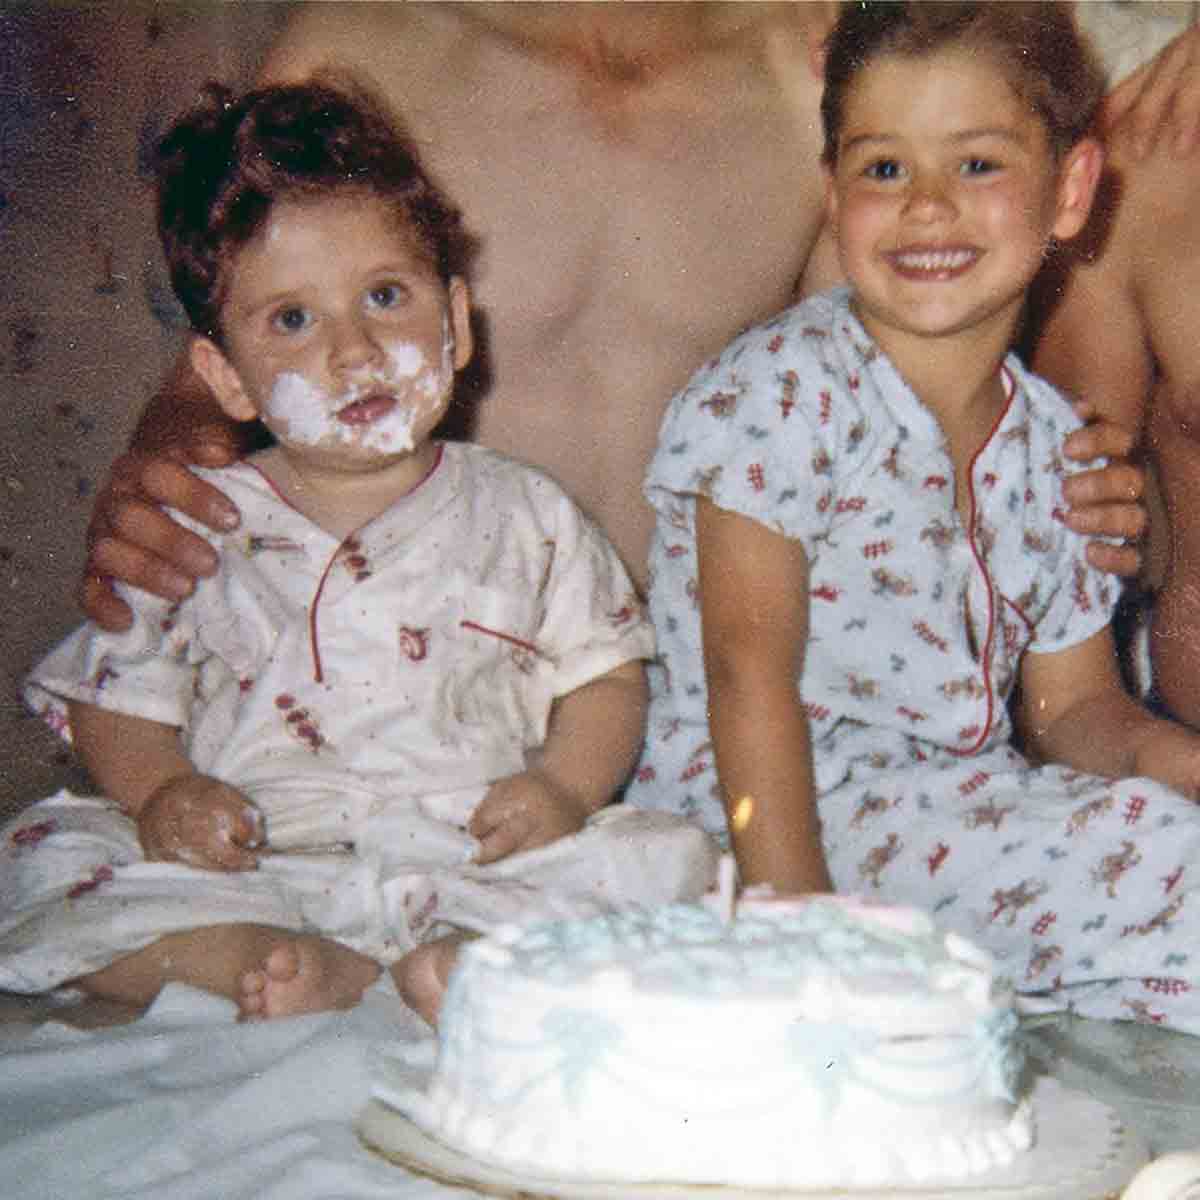 Two small boys in front of a birthday cake. One boy has frosting all over his face.